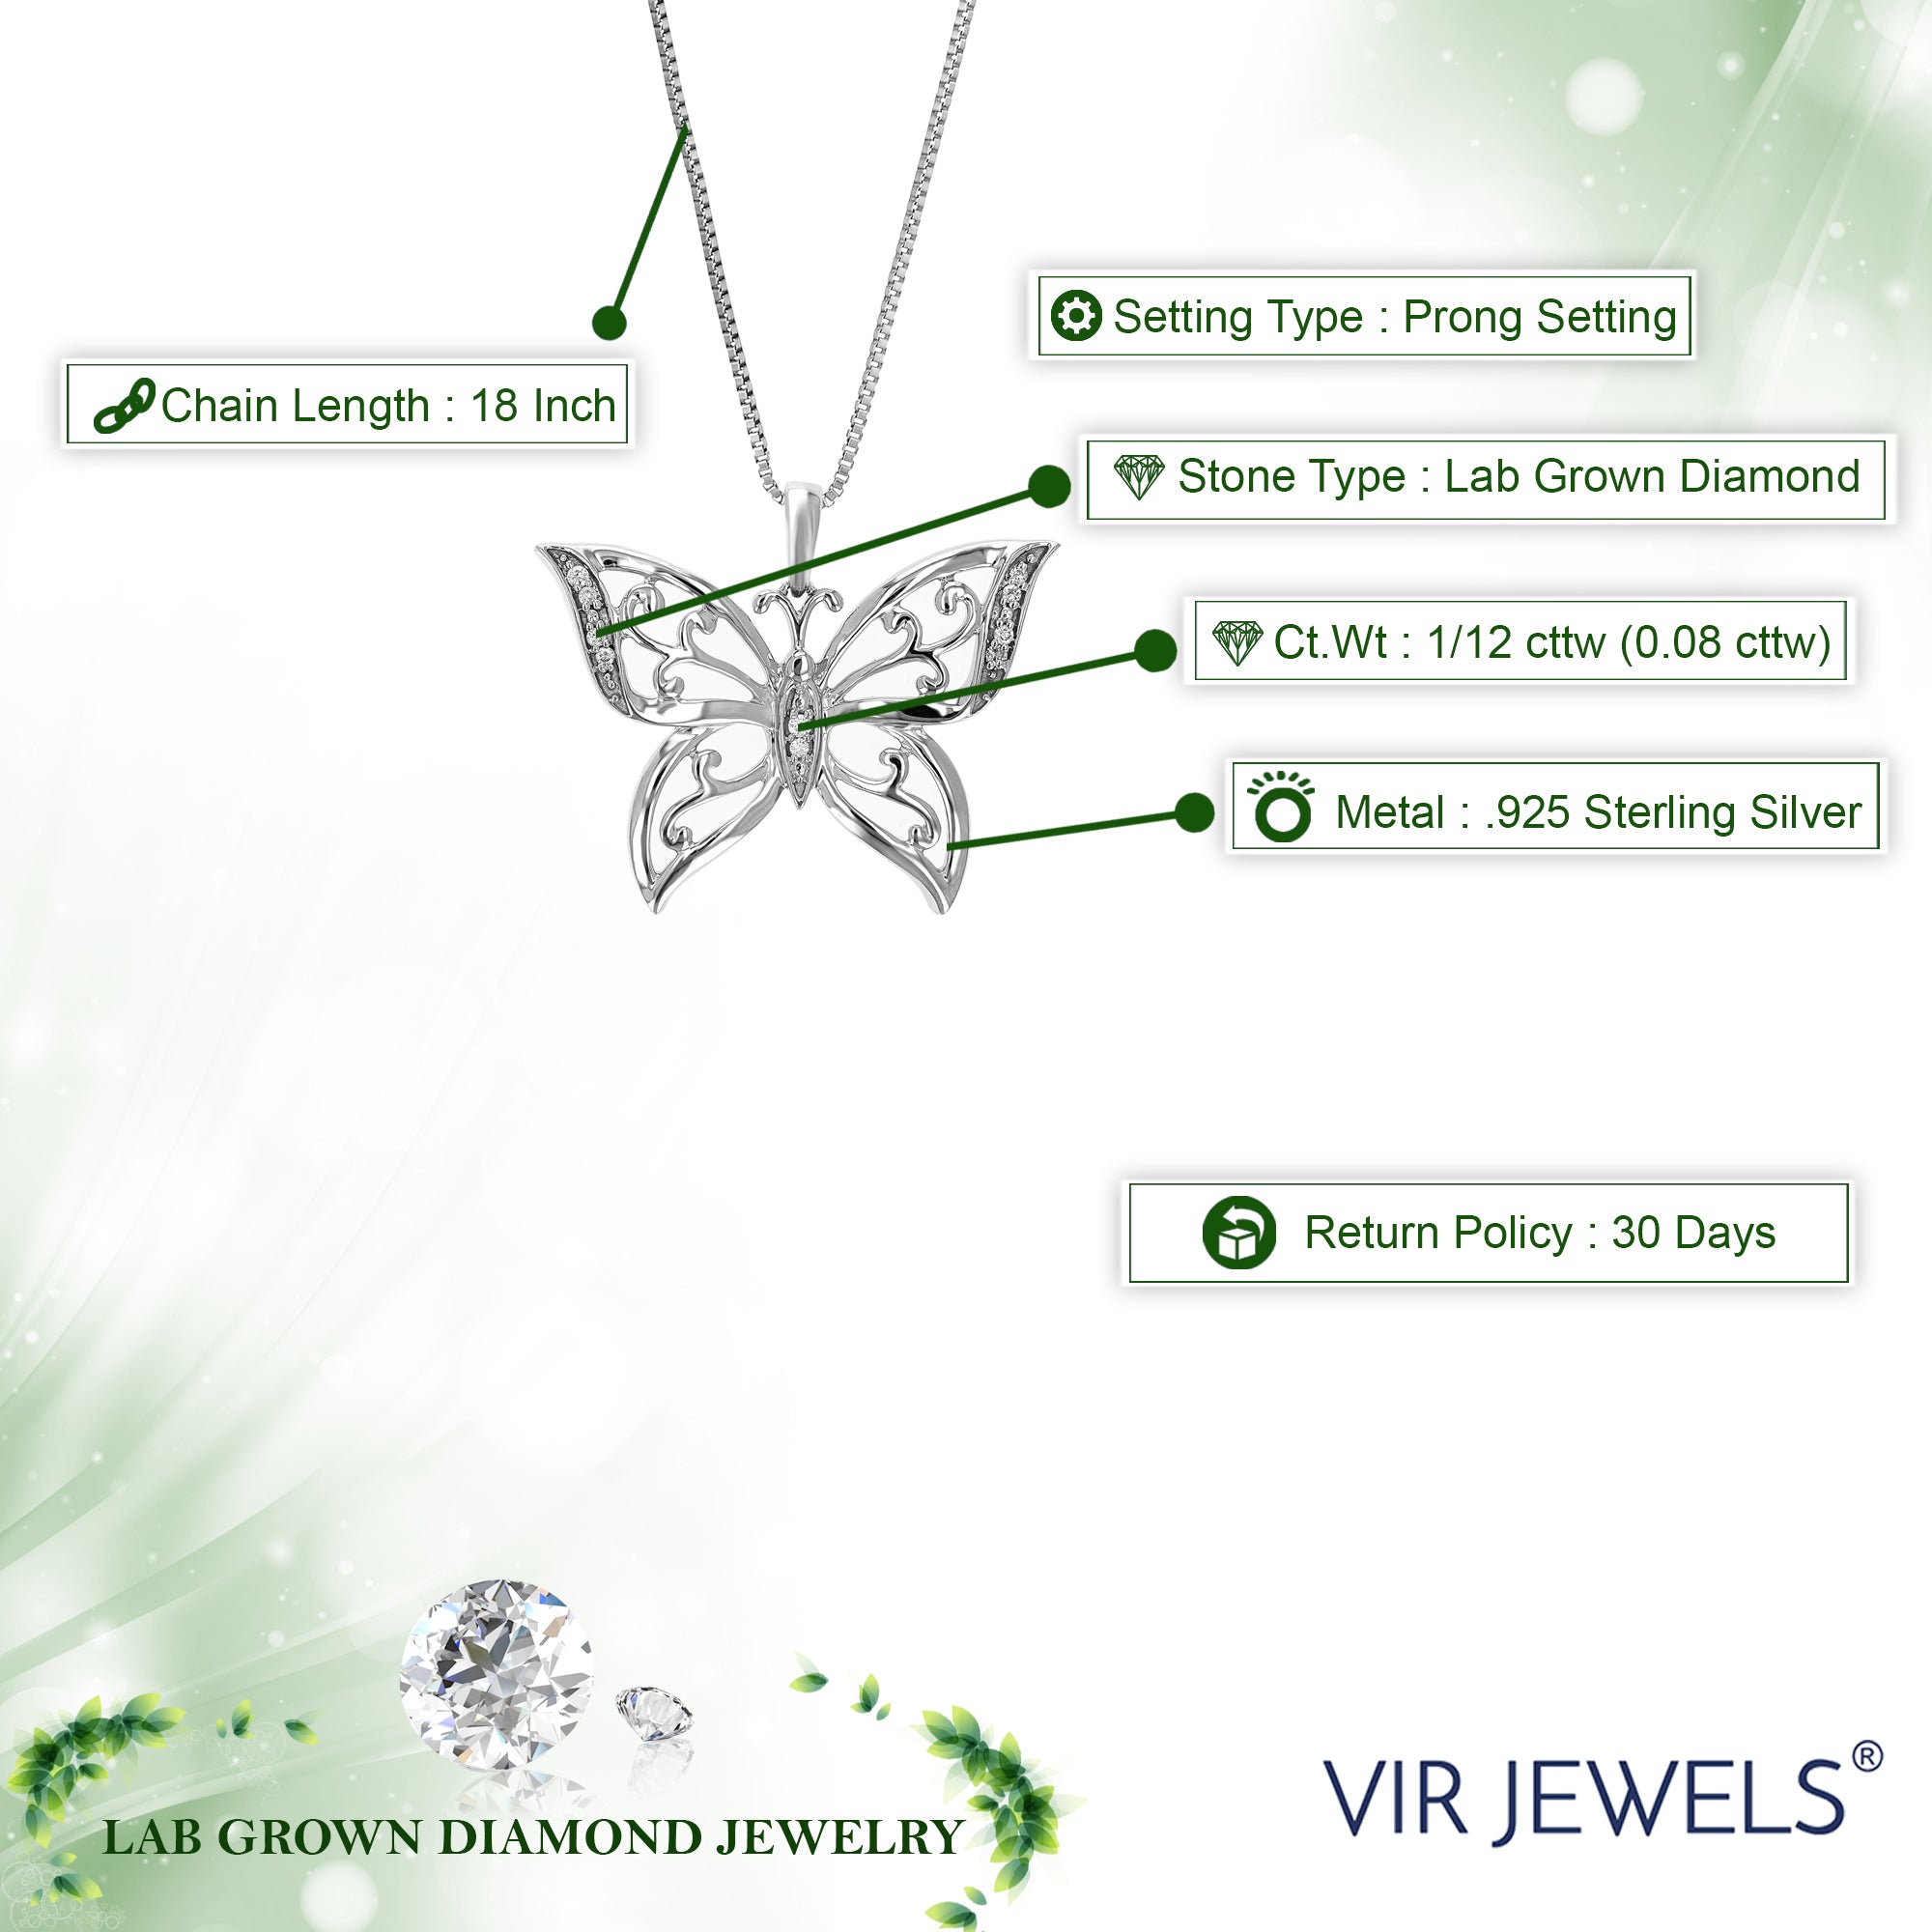 1/12 cttw 10 Stones Lab Grown Diamond Butterfly Pendant Necklace .925 Sterling Silver 1 Inch with 18 Inch Chain, Size 3/4 Inch